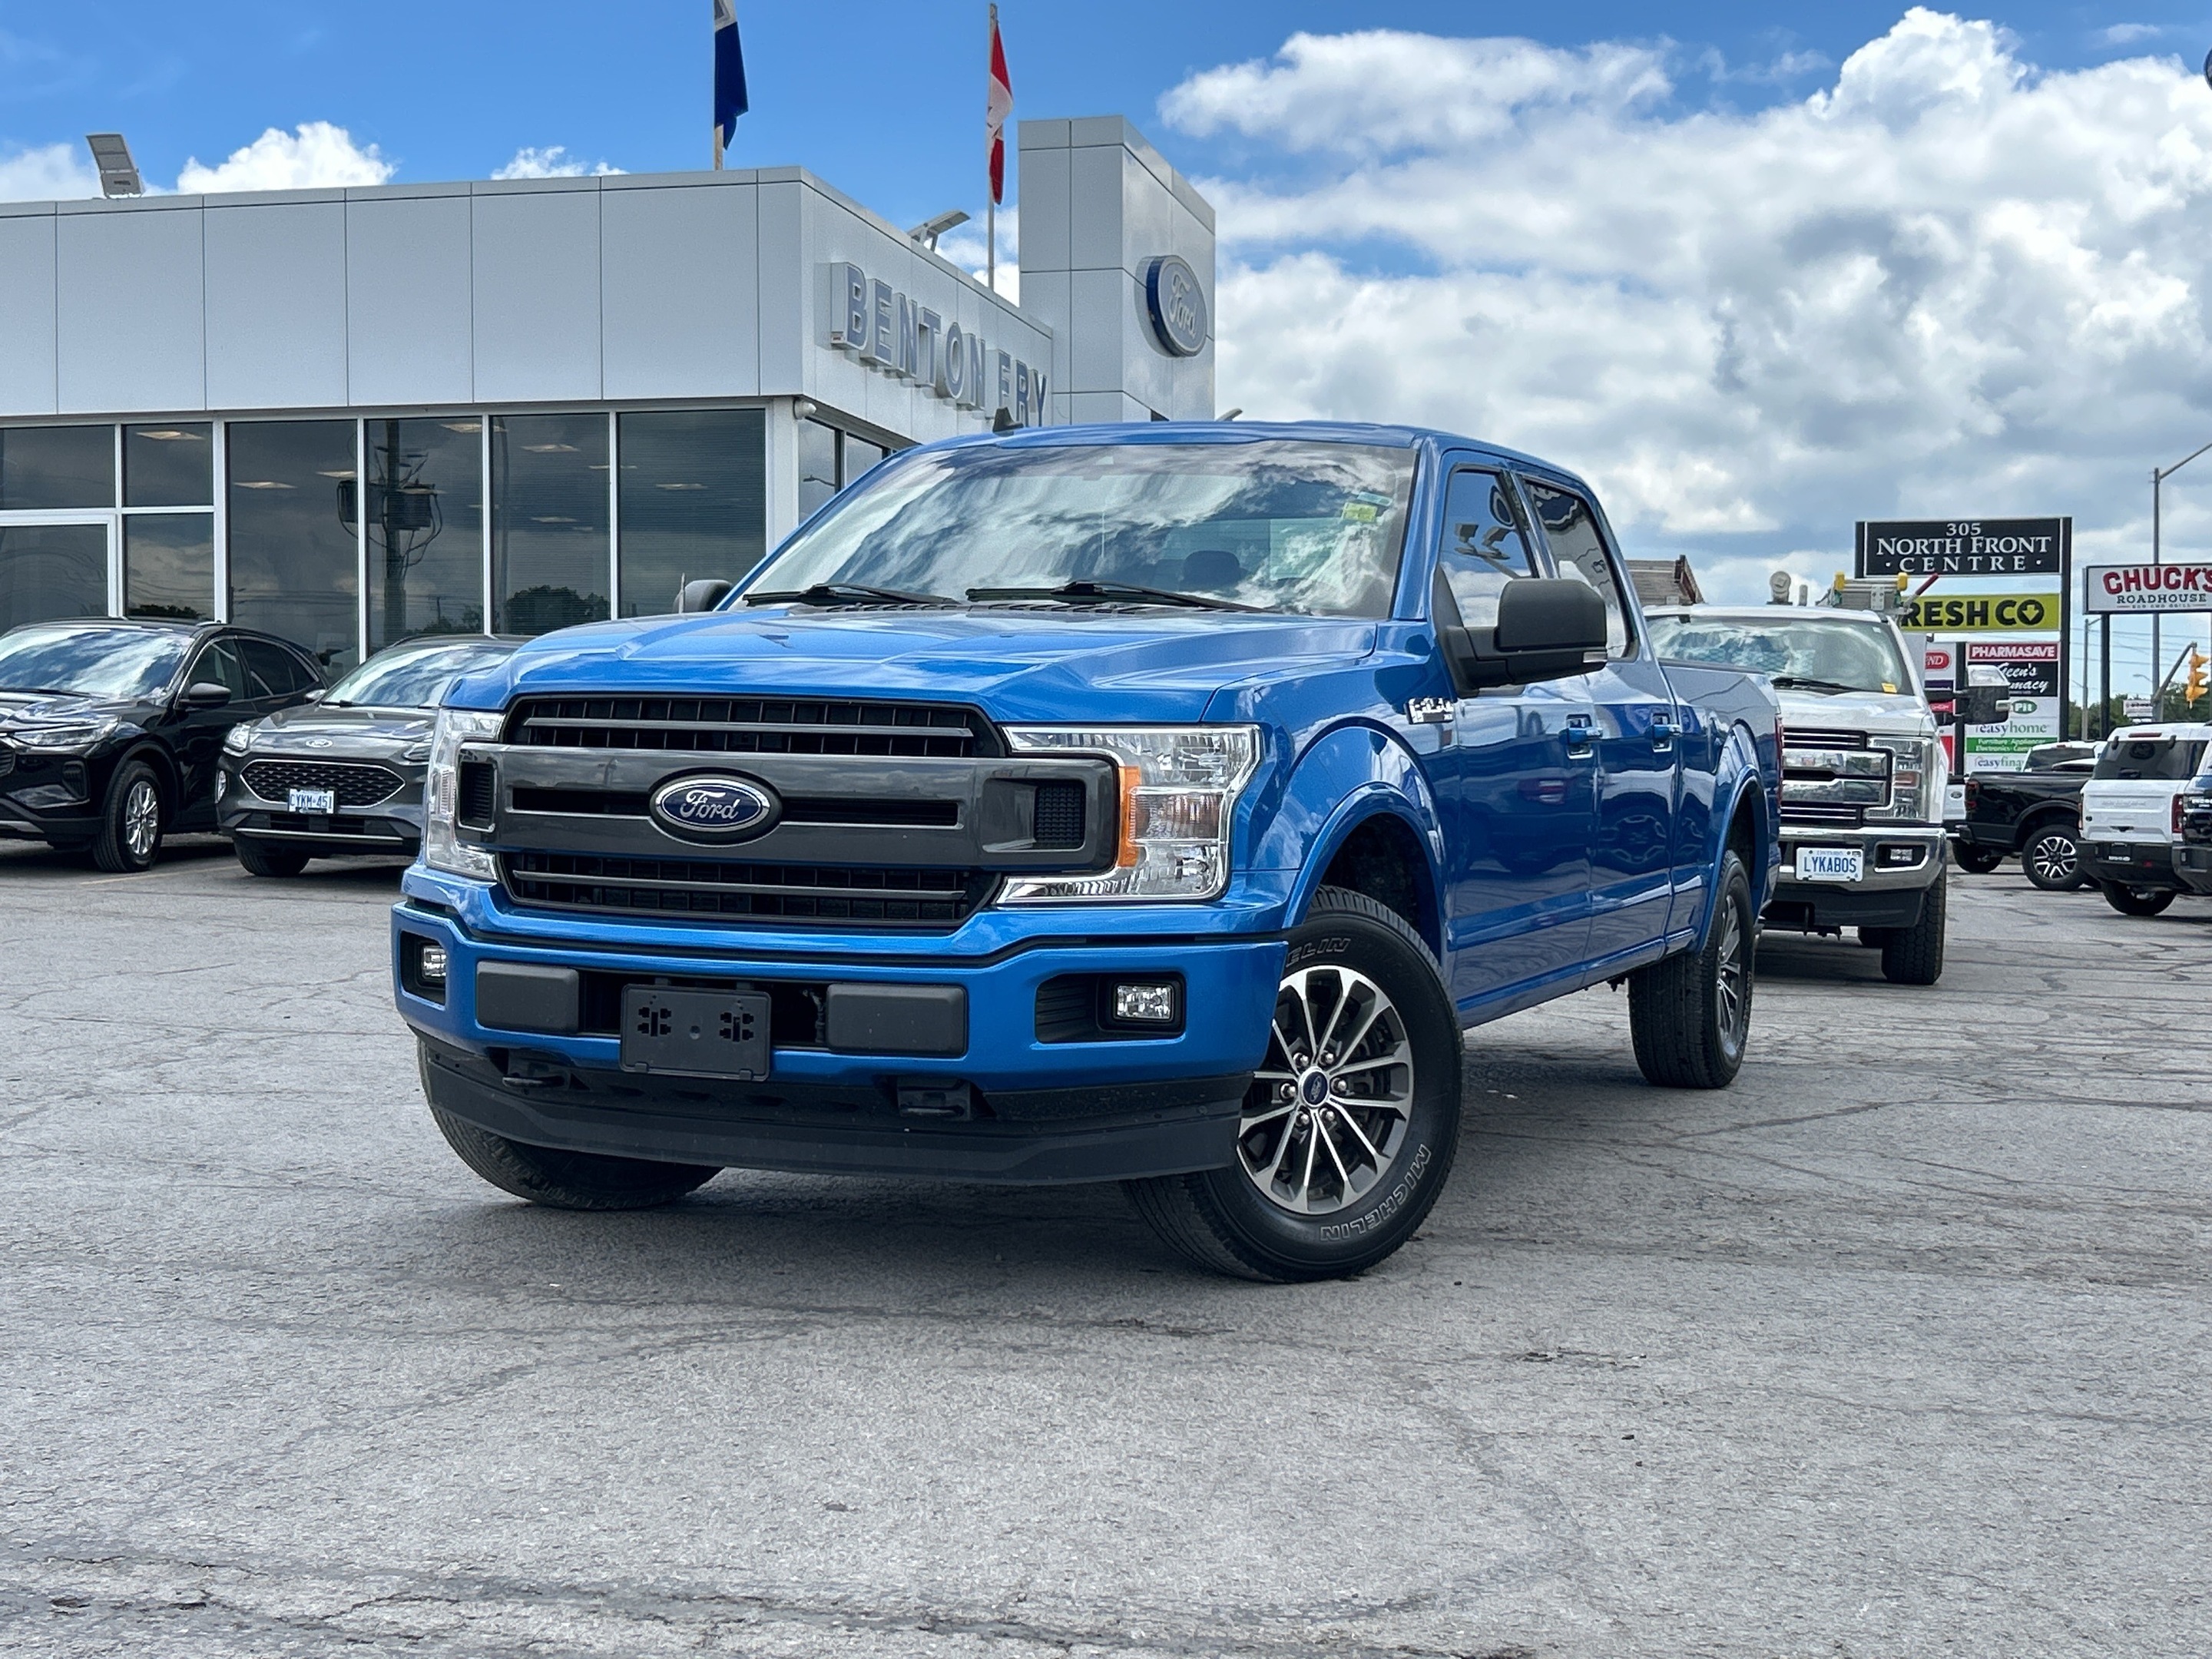 2020 Ford F-150 XLT - 5.0L V8 Sport Package With NAV SYNC3 Trailer